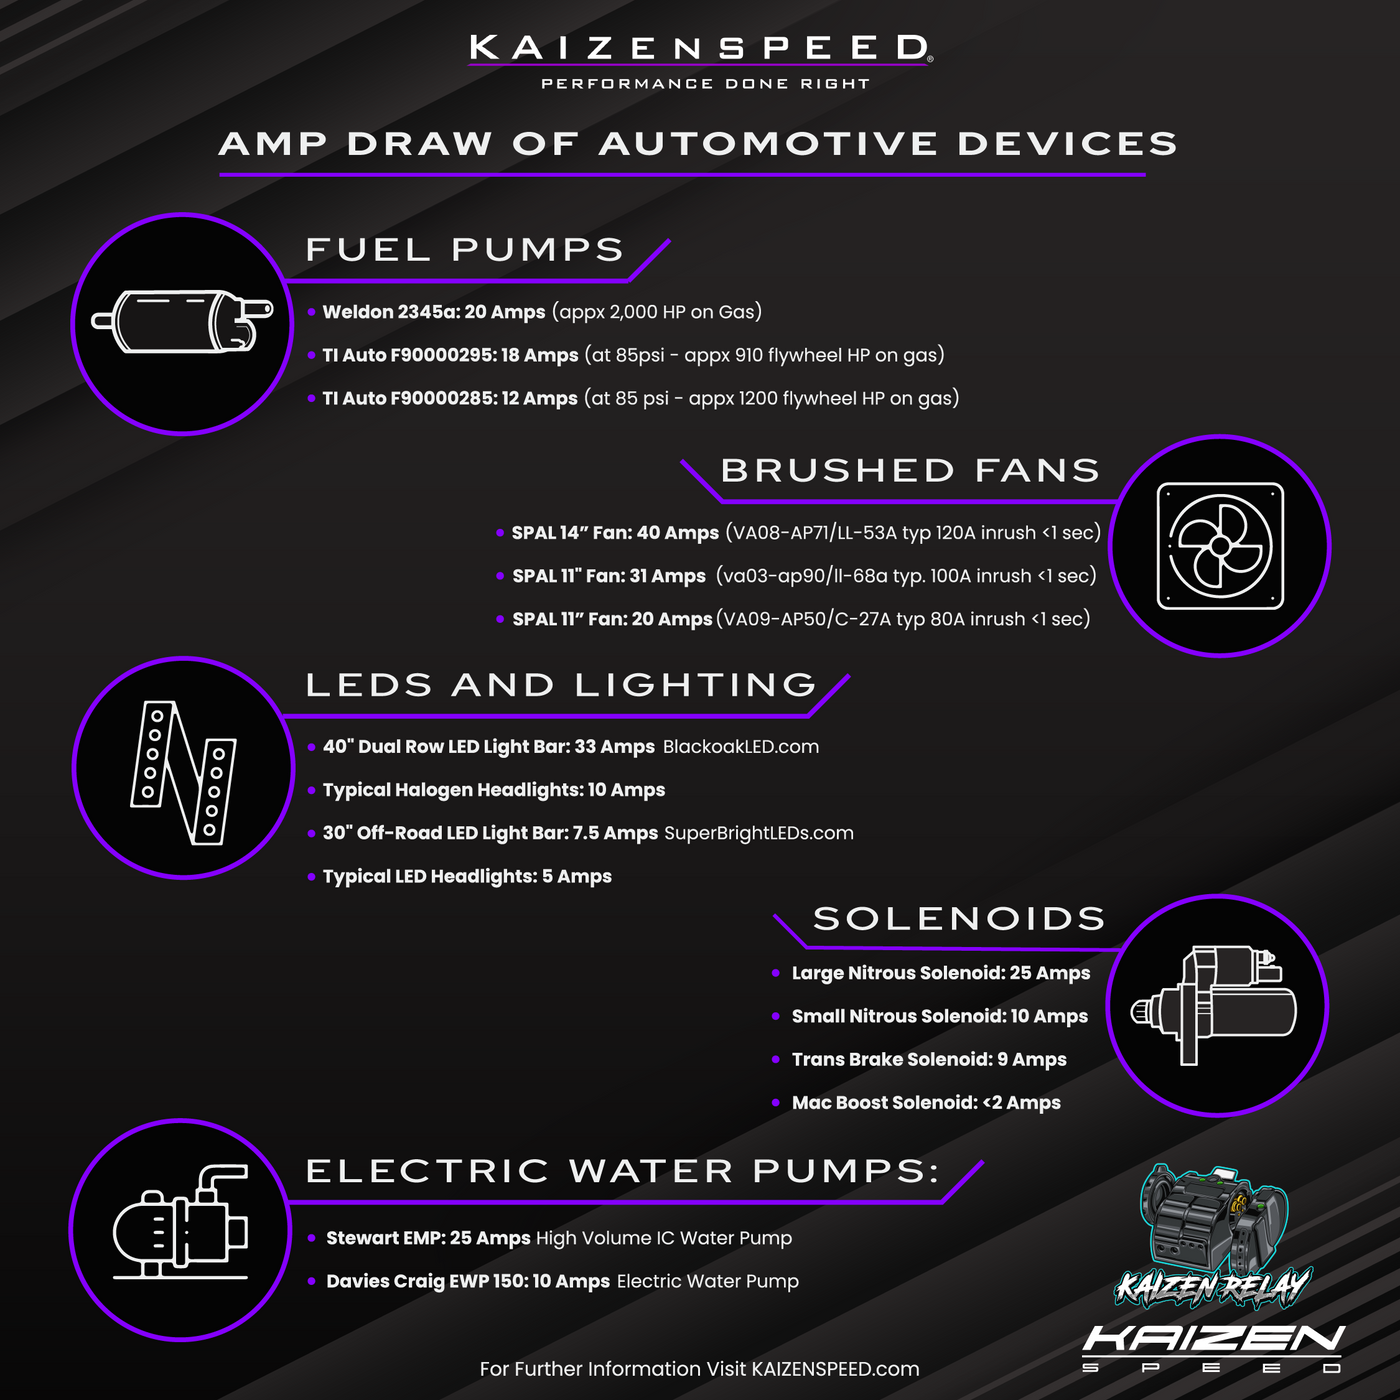 How Much Current? Amp Draw of Automotive Devices Infographic by Kaizen Speed